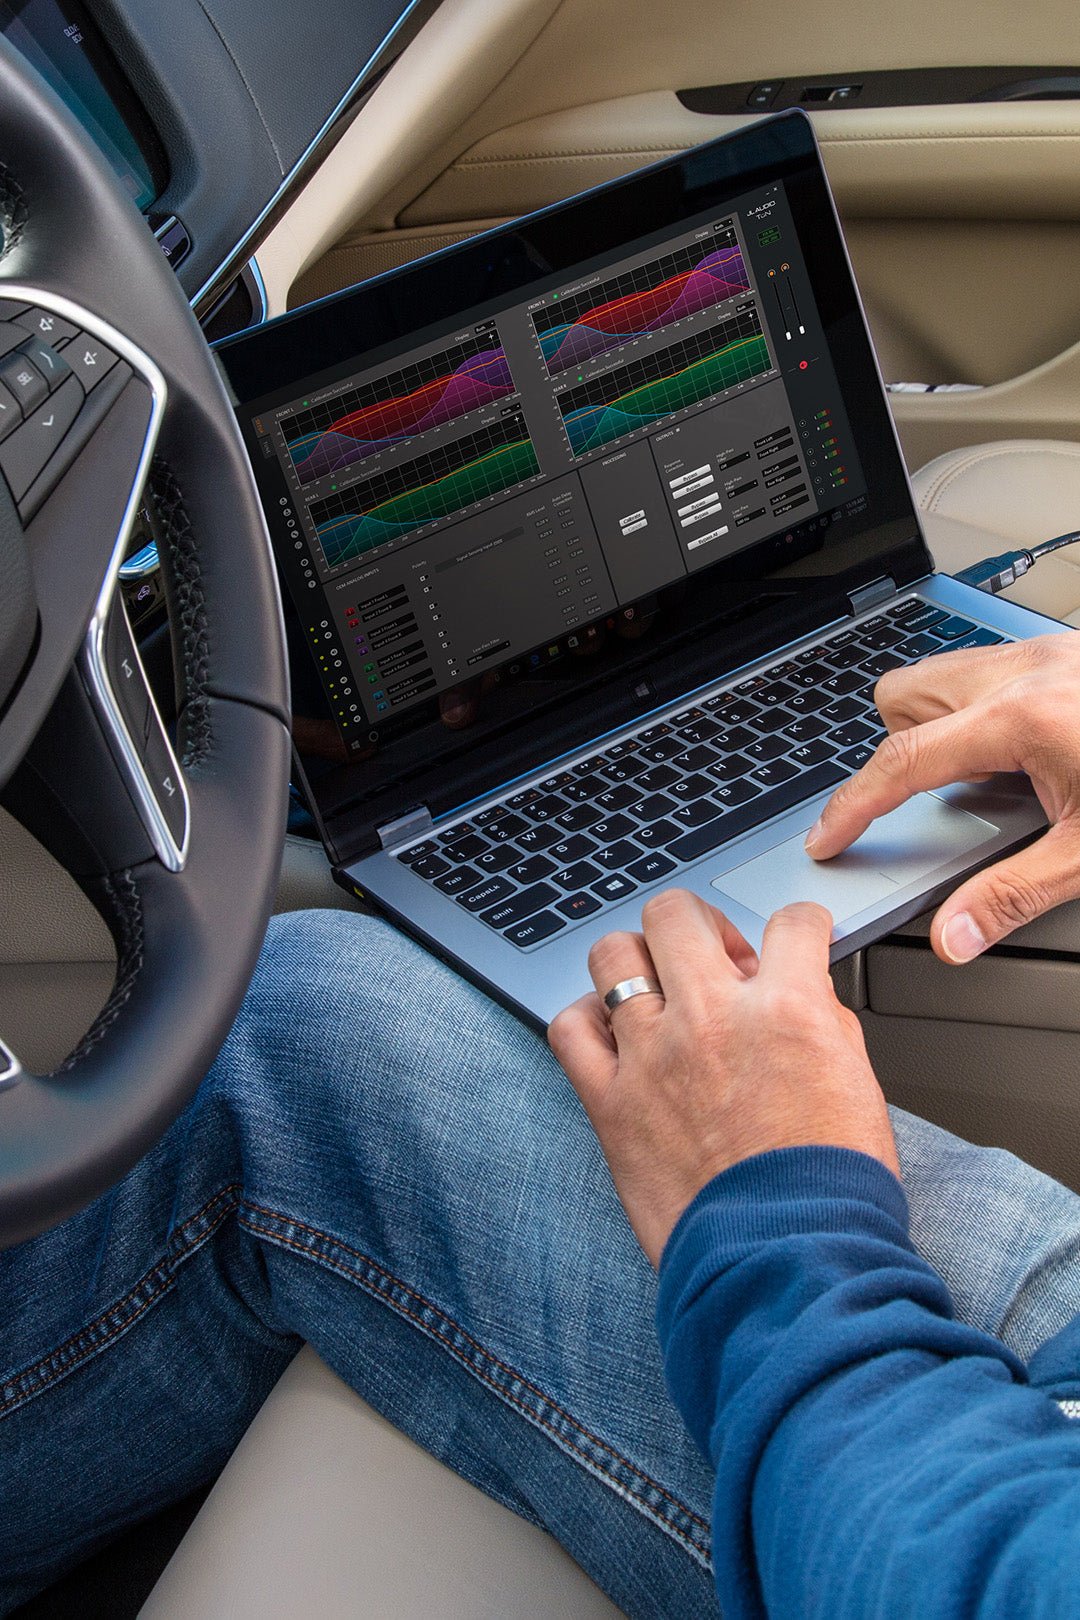 A person inside a vehicle adjusting sound frequencies using TuN software on a laptop.